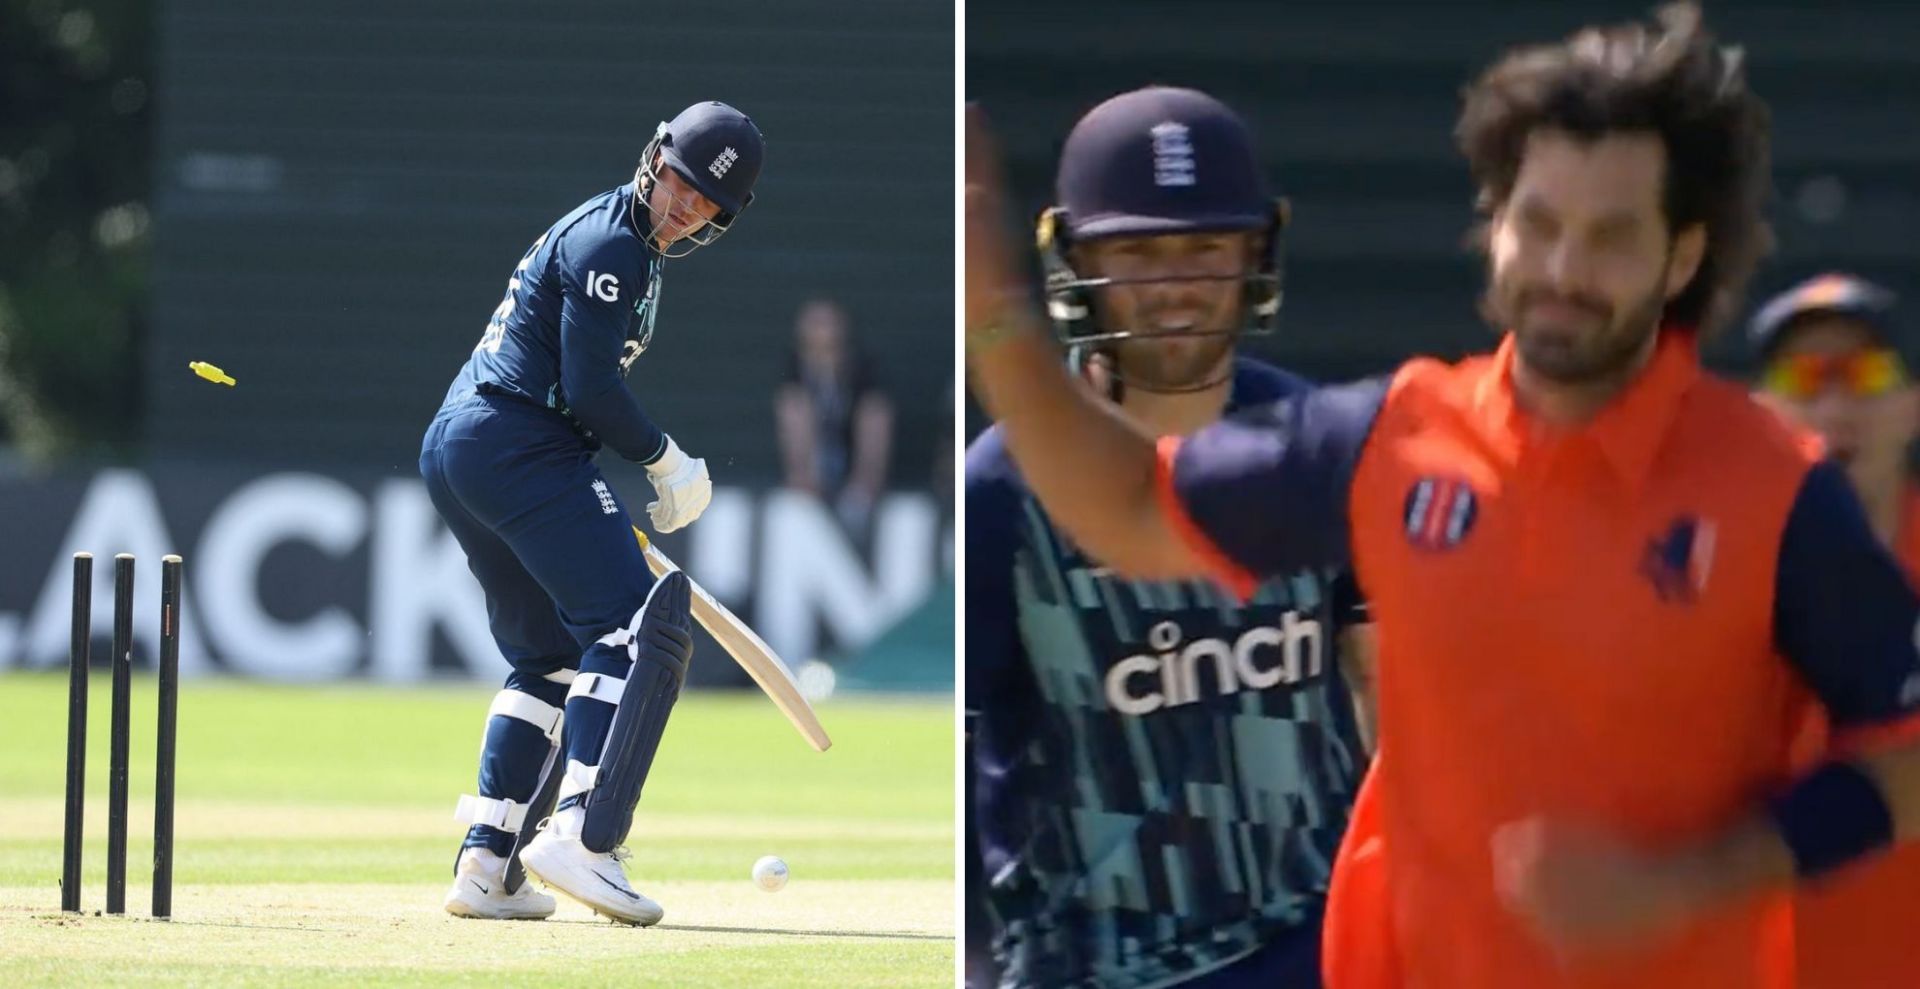 Jason Roy failed to make a mark with the bat (Credit: Twitter)